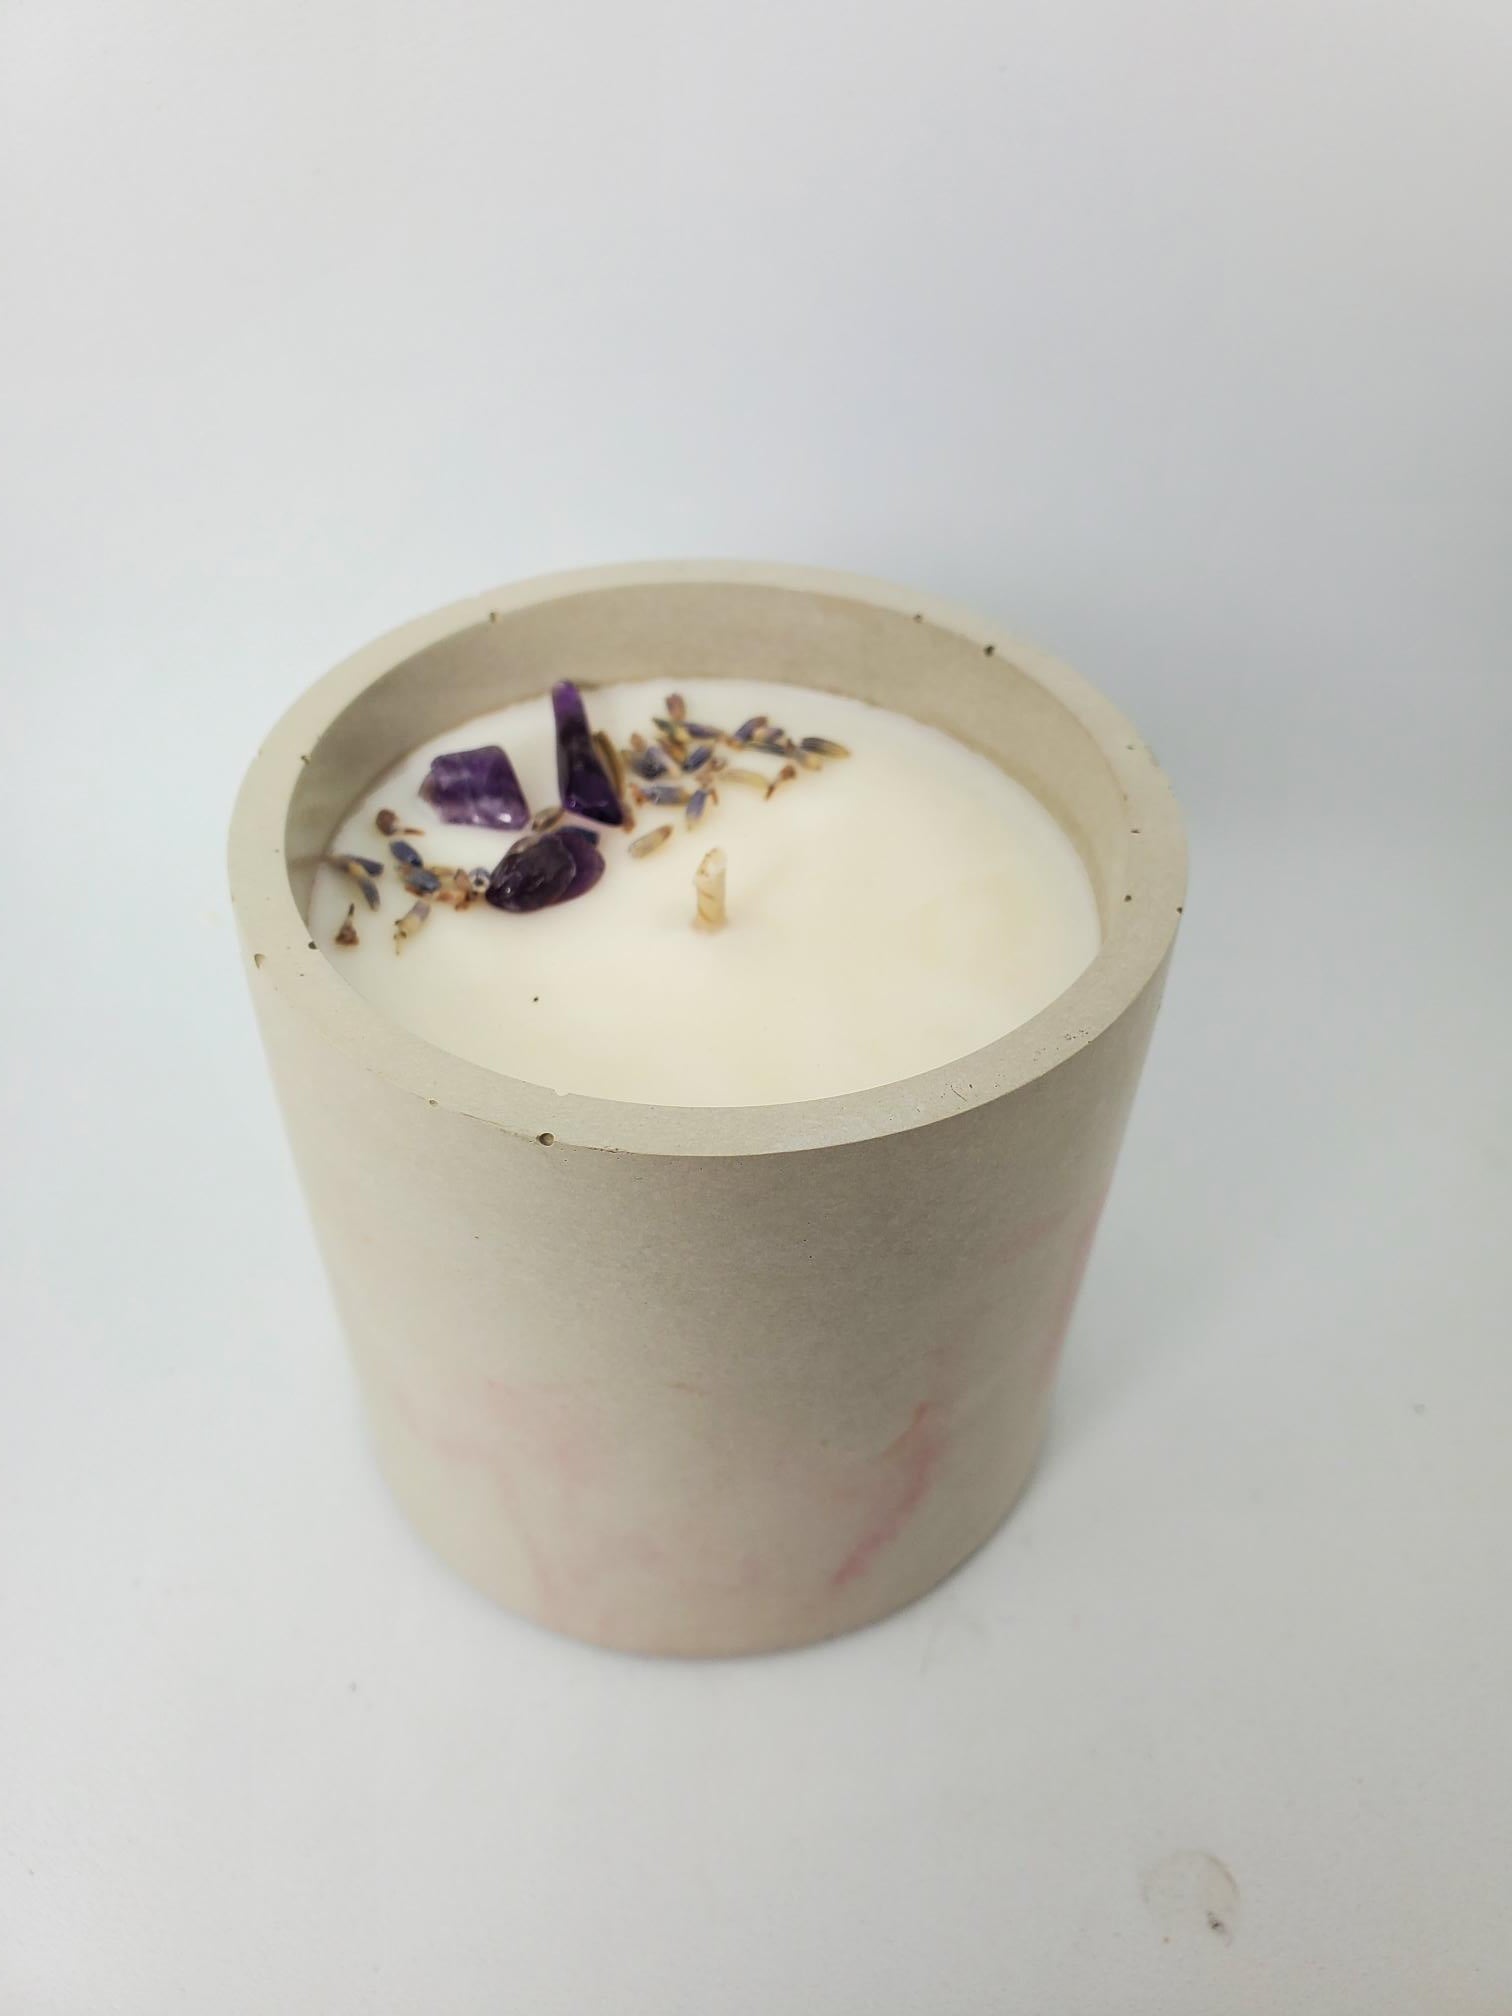 Lavender Vanilla Soy Candle - FostersFieldssoap#soycandles#fostersfields#handmadesoap#natural soapsoy candleLavender Vanilla Soy Candle